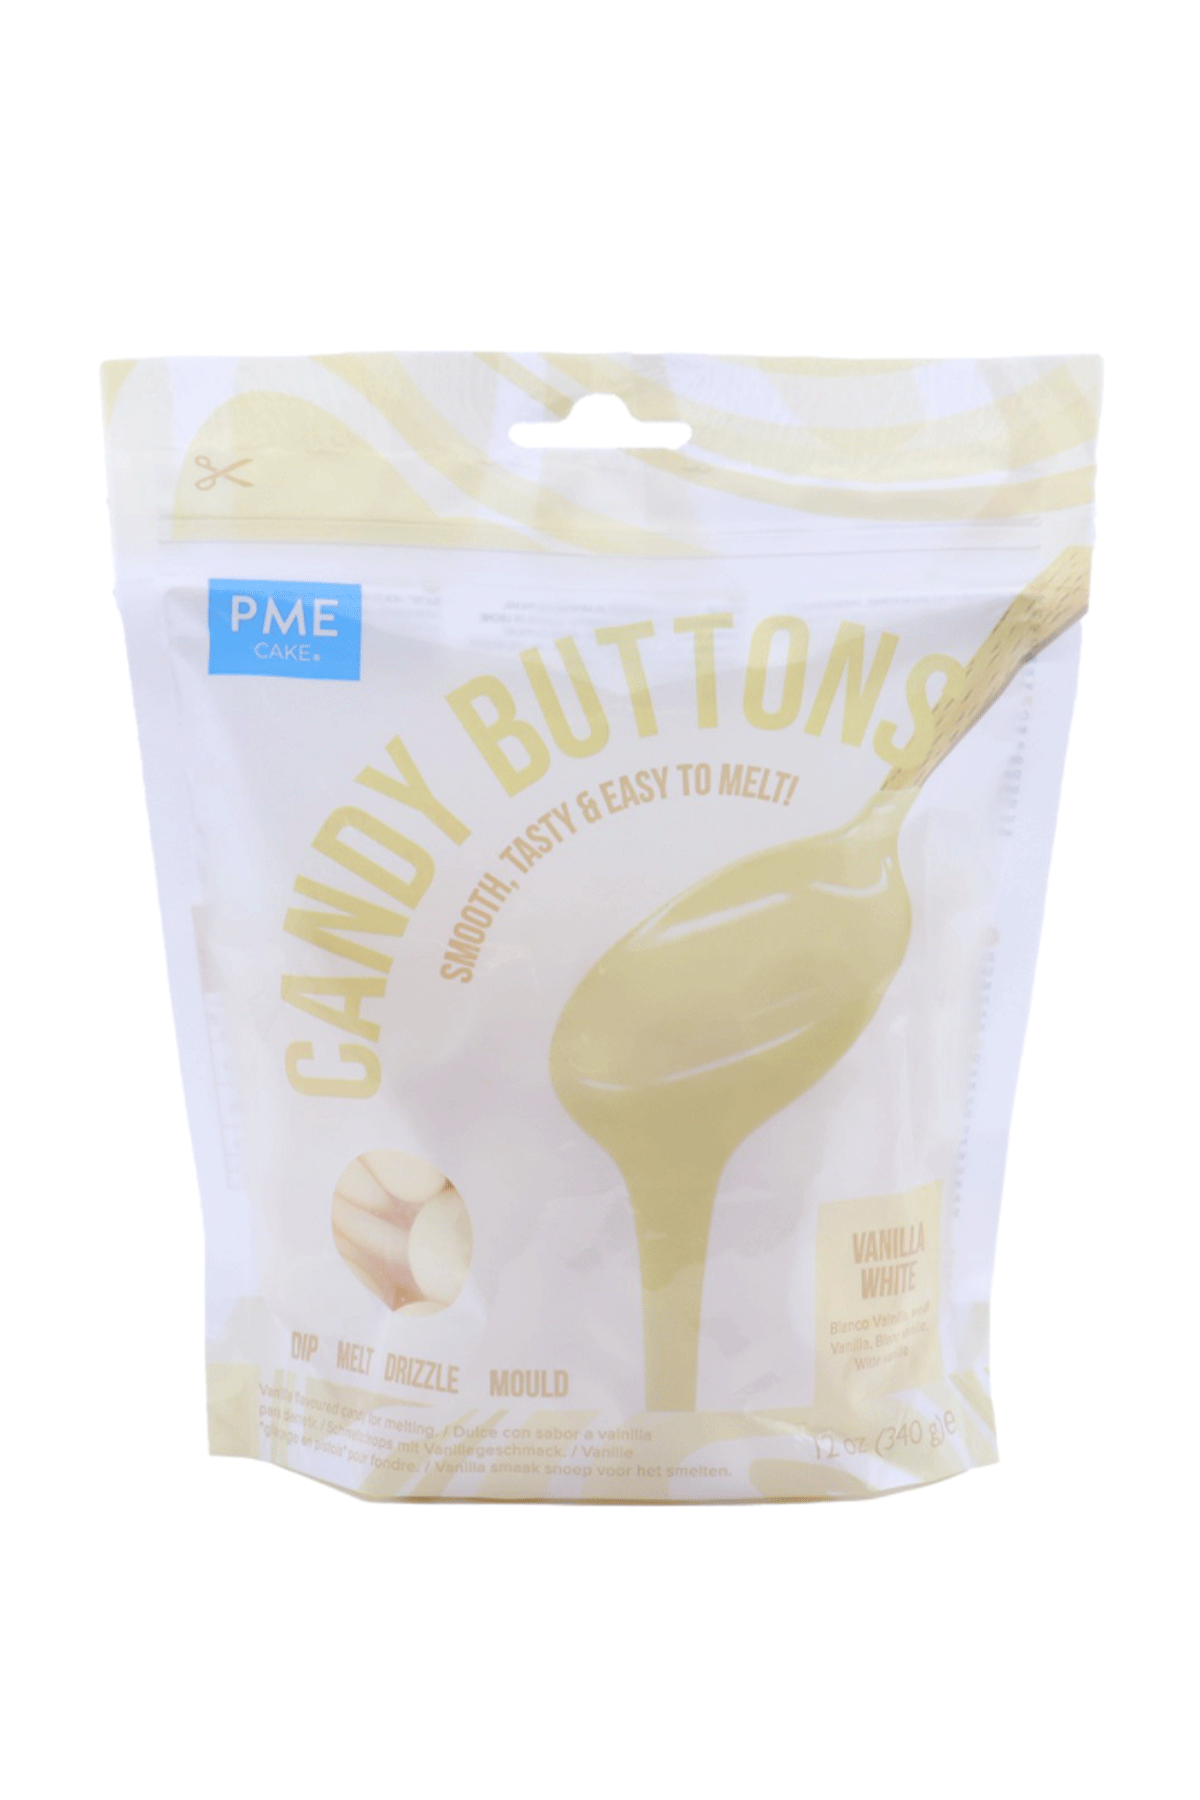 Candy Buttons - White Vanilla (284g/10 oz) PME